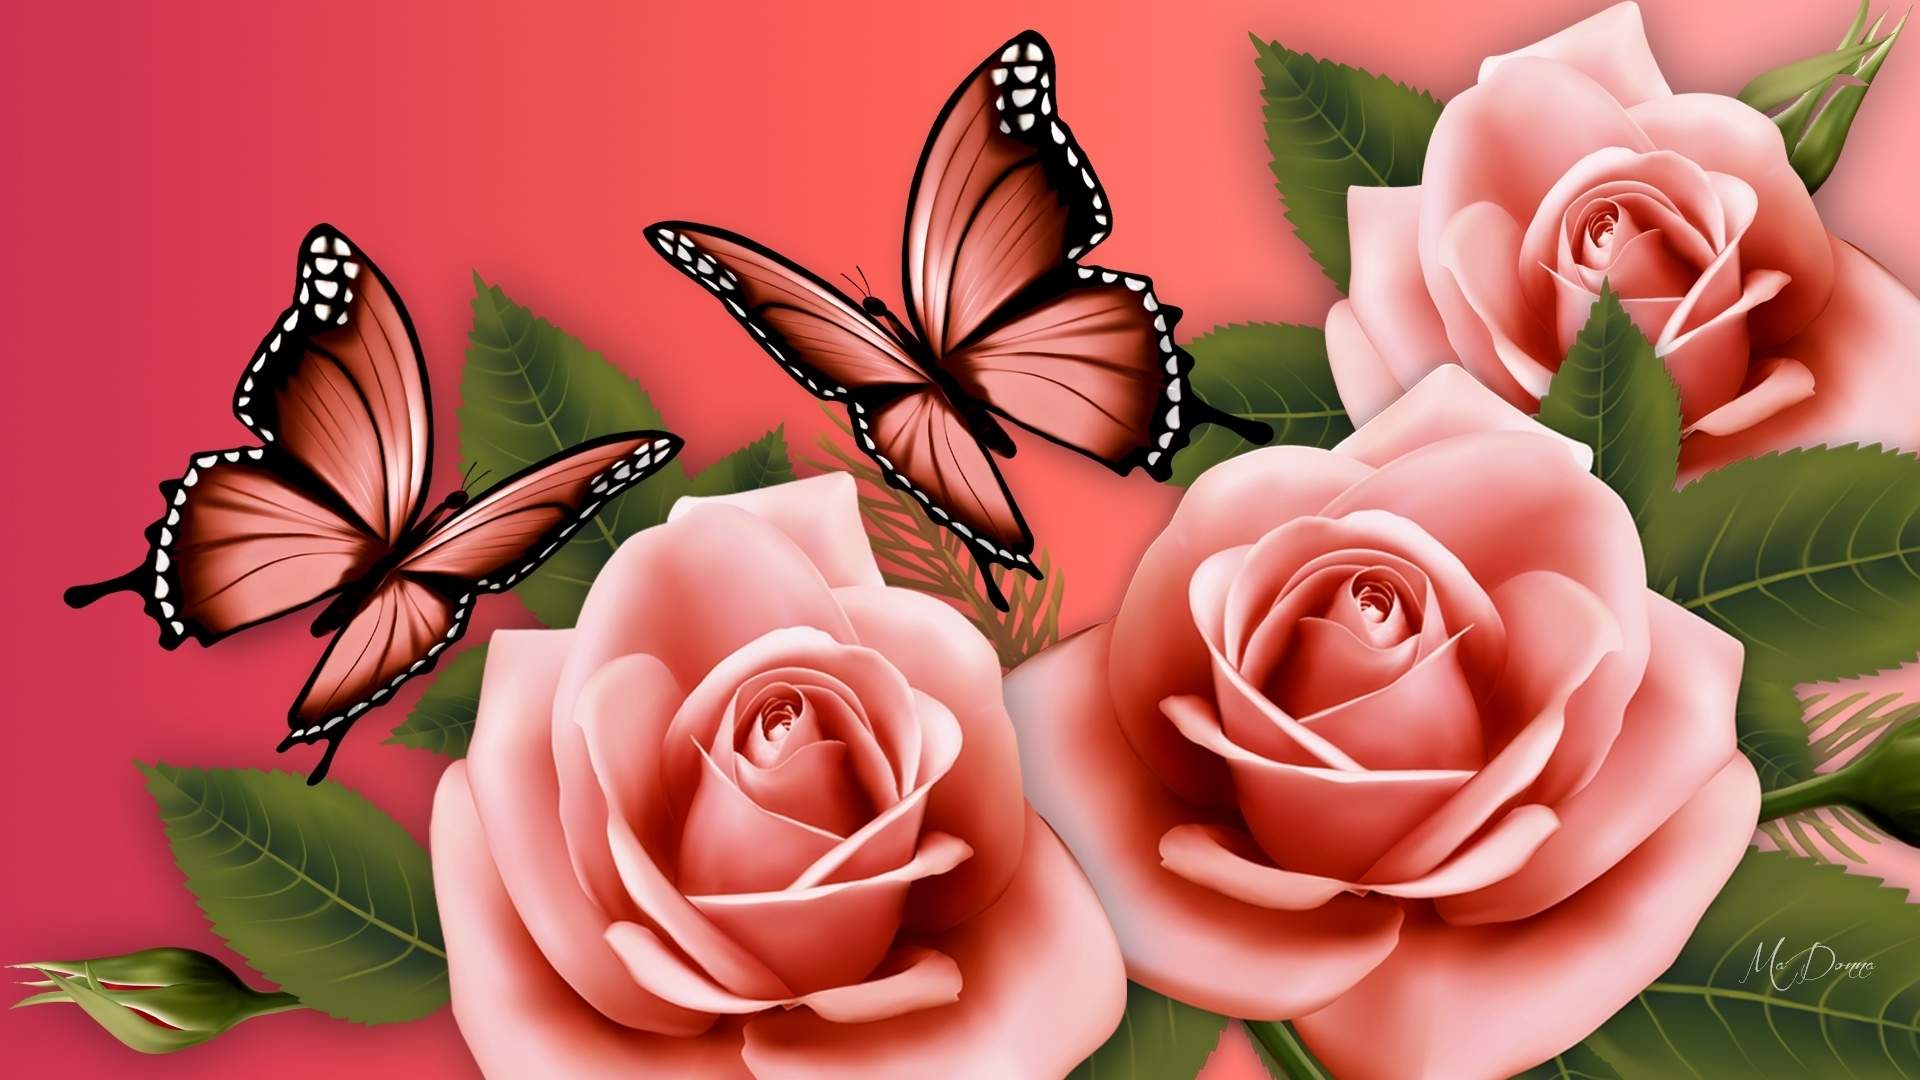 flowers with butterfly wallpaper HD flower and butterfly wallpaper